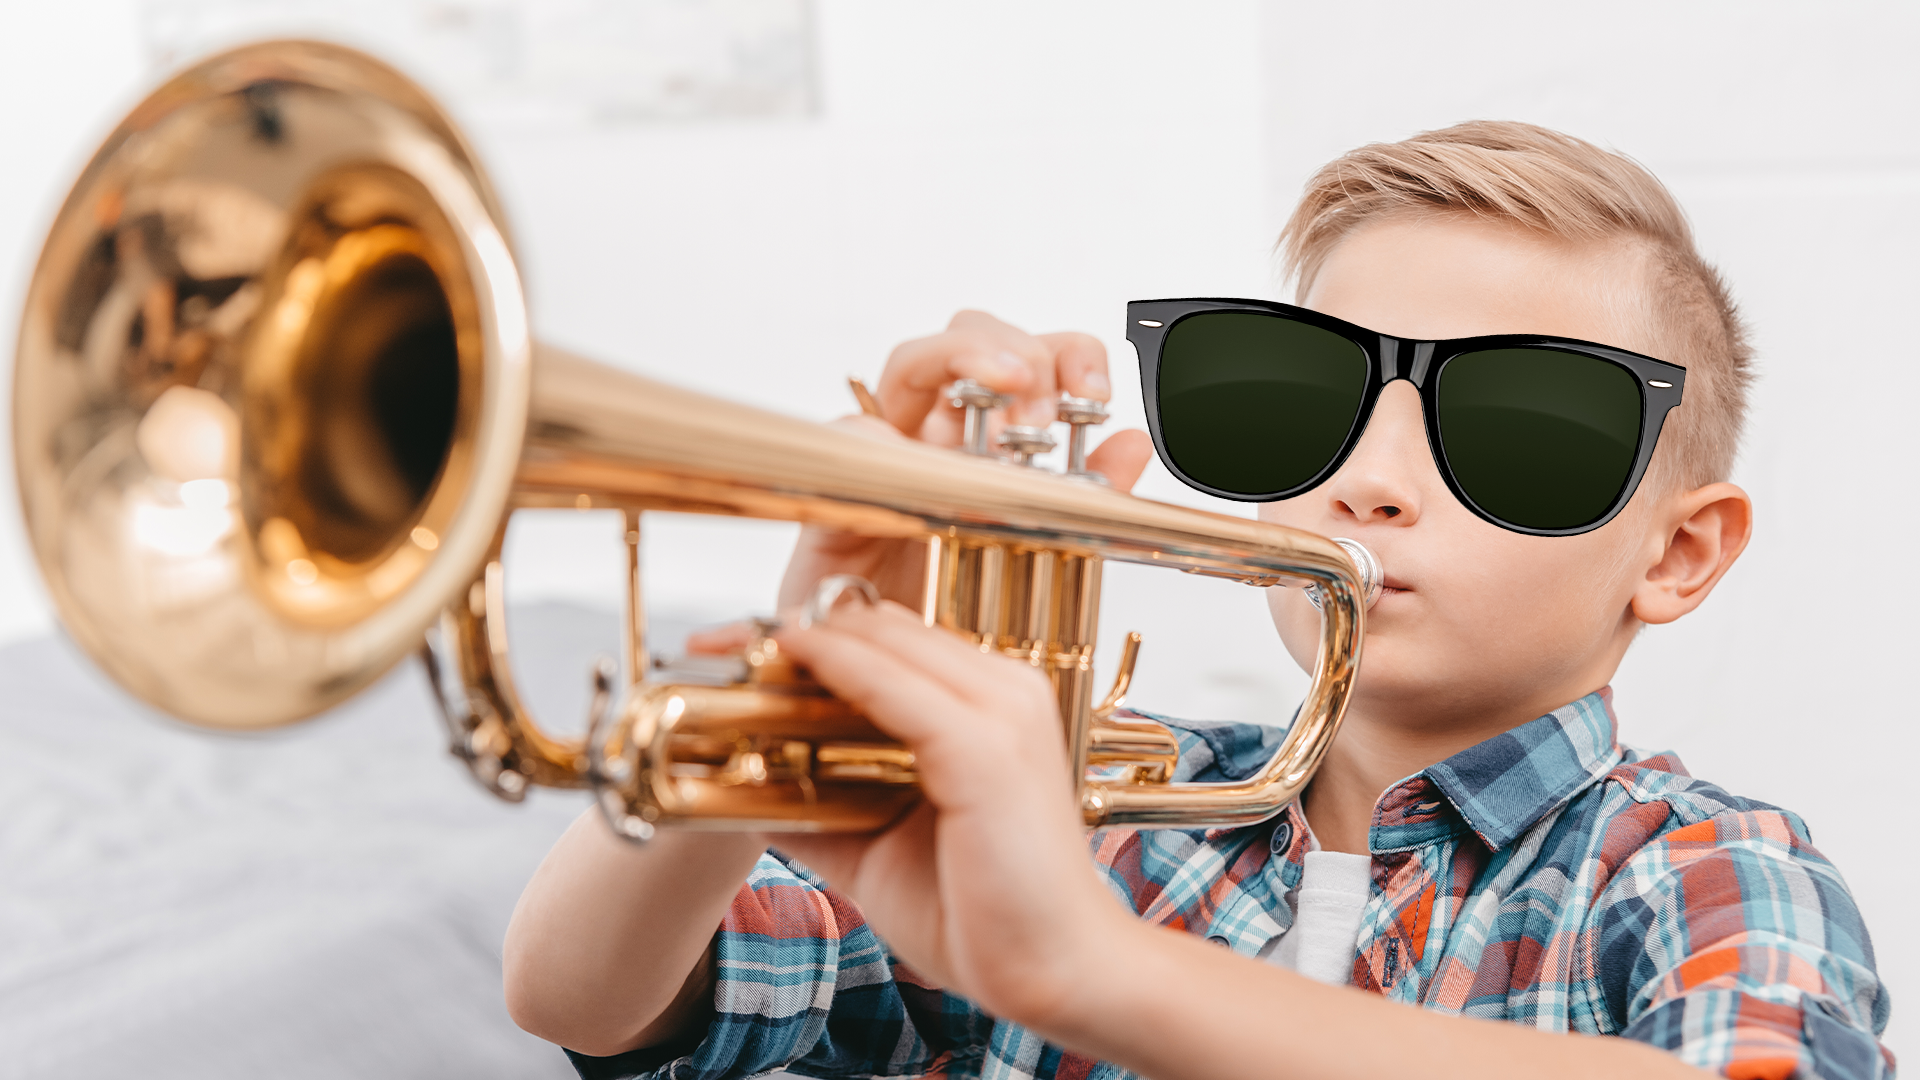 A cool boy playing the trumpet